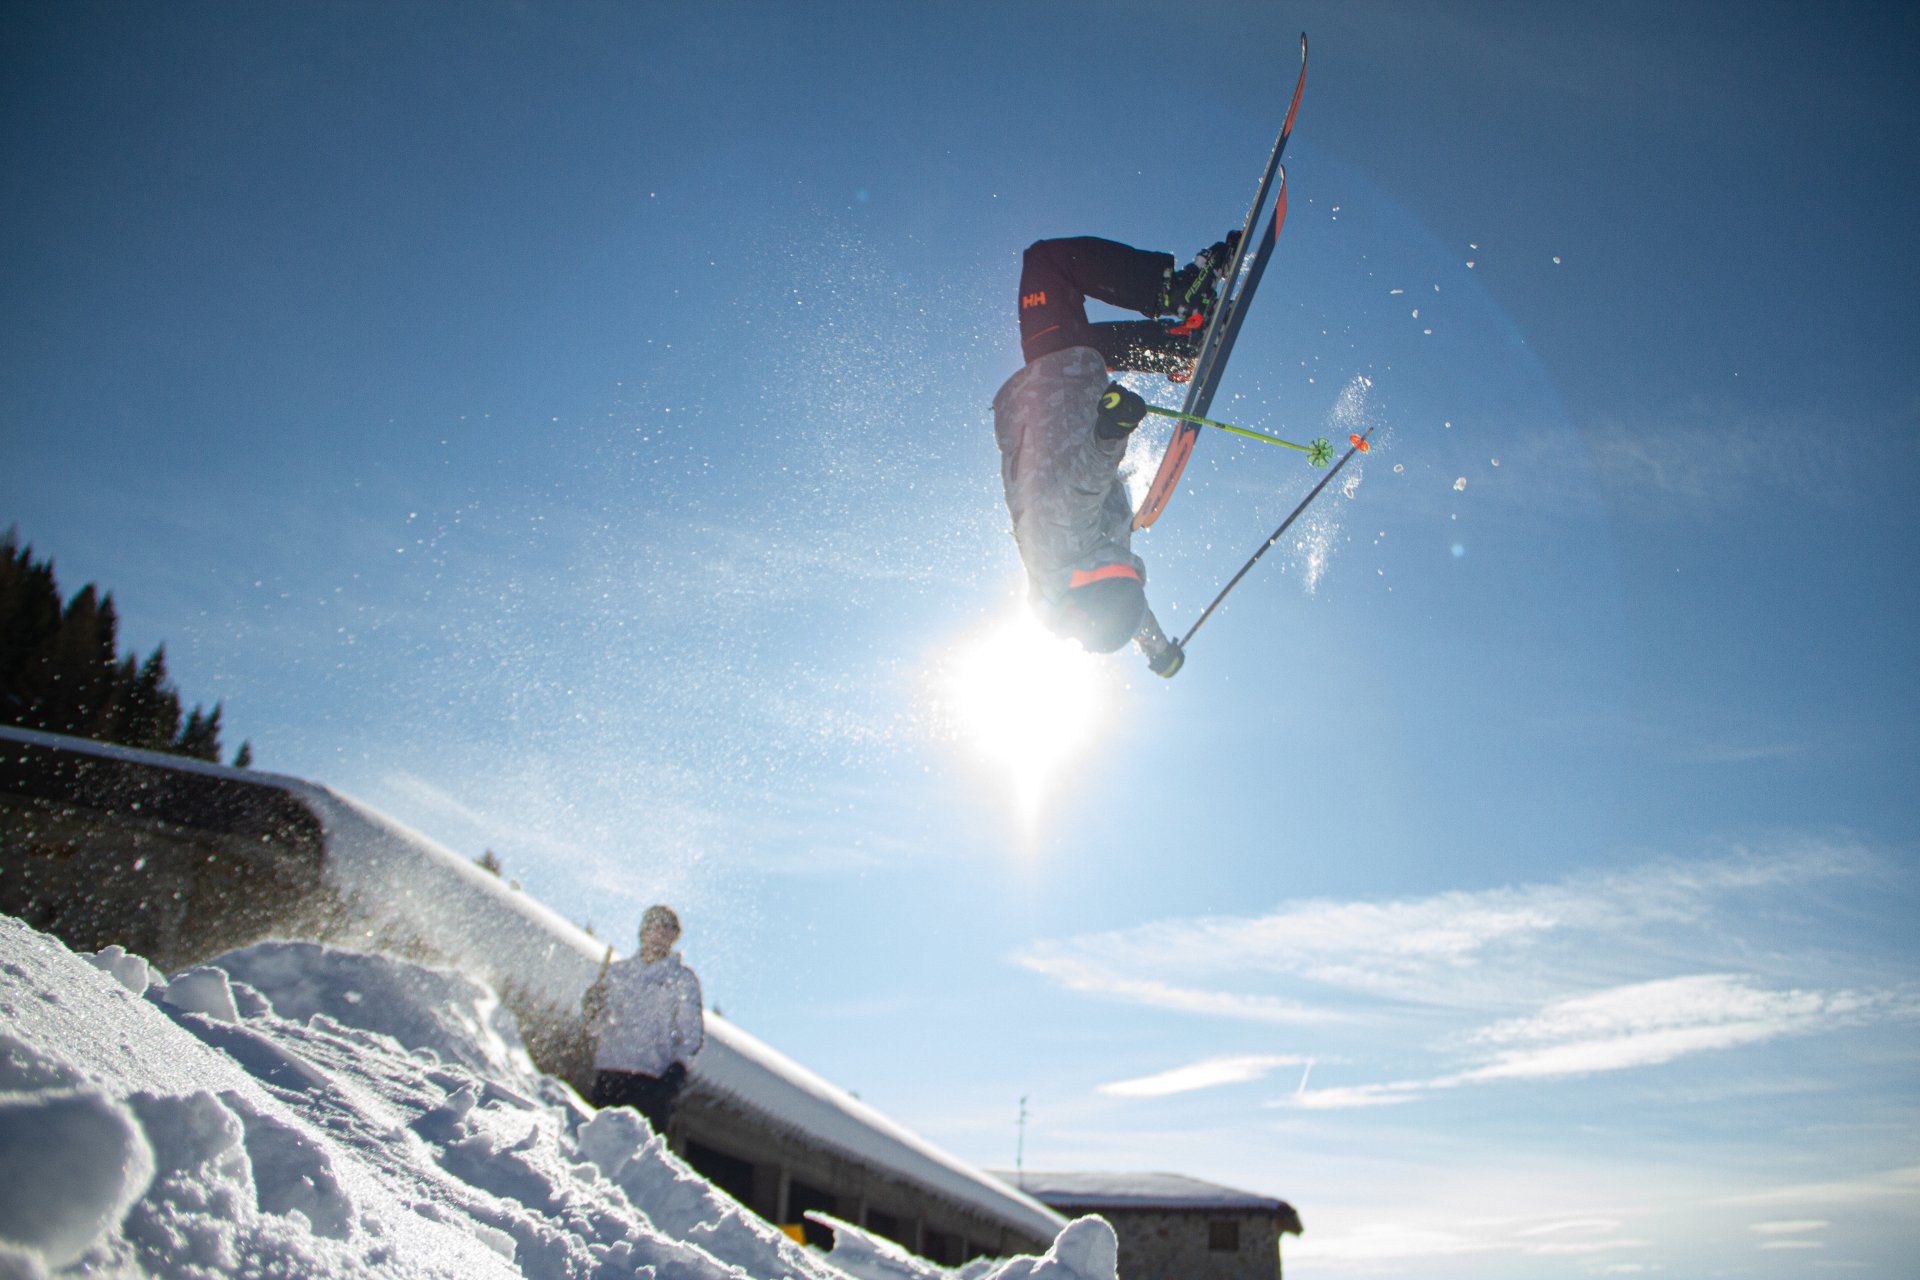 A person in a gray jacket freestyle skiing near a ski resort